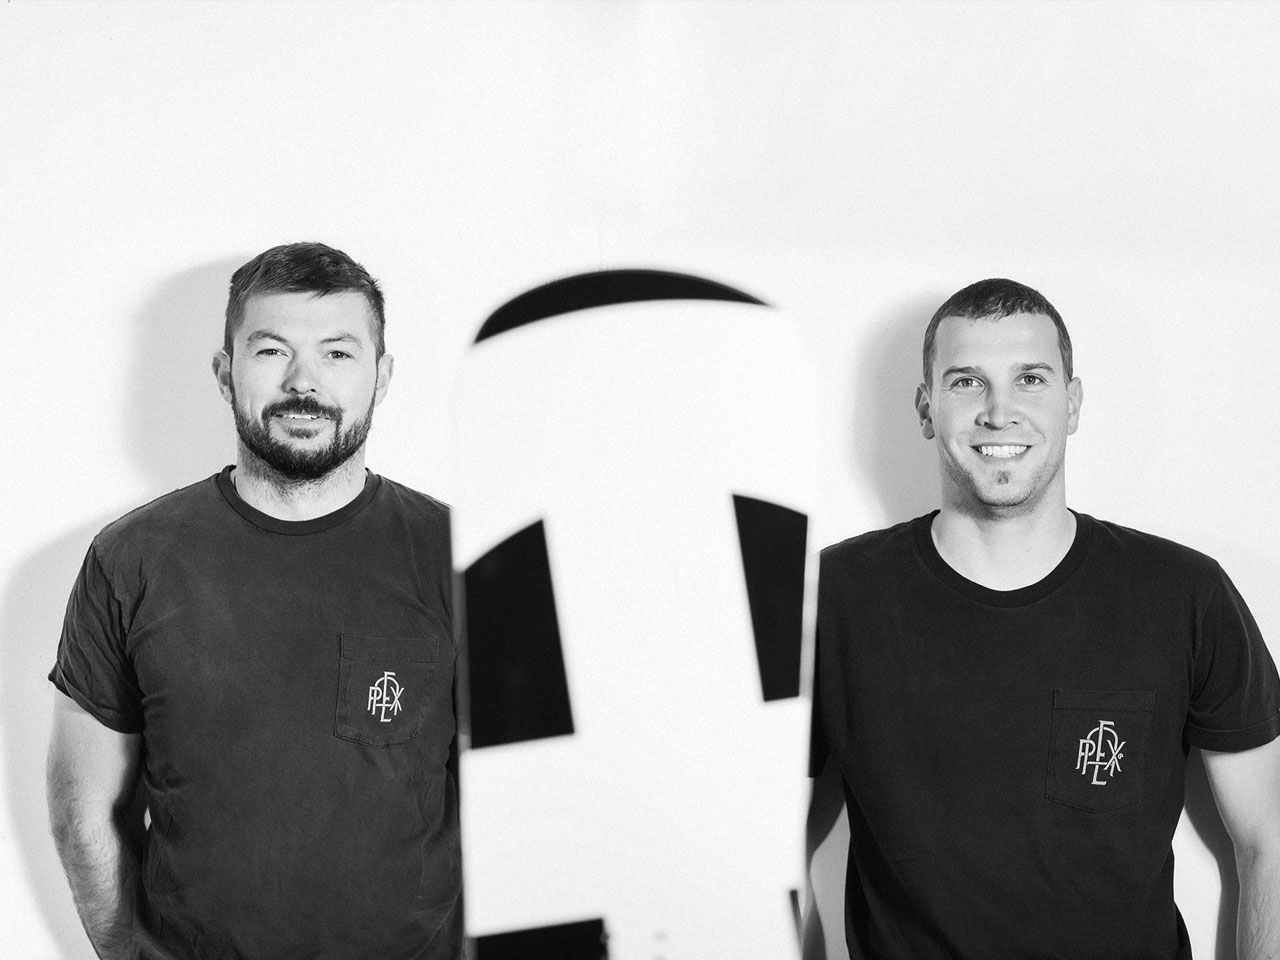 Peter Maier and Bernd Wallner from Apex Snowboards